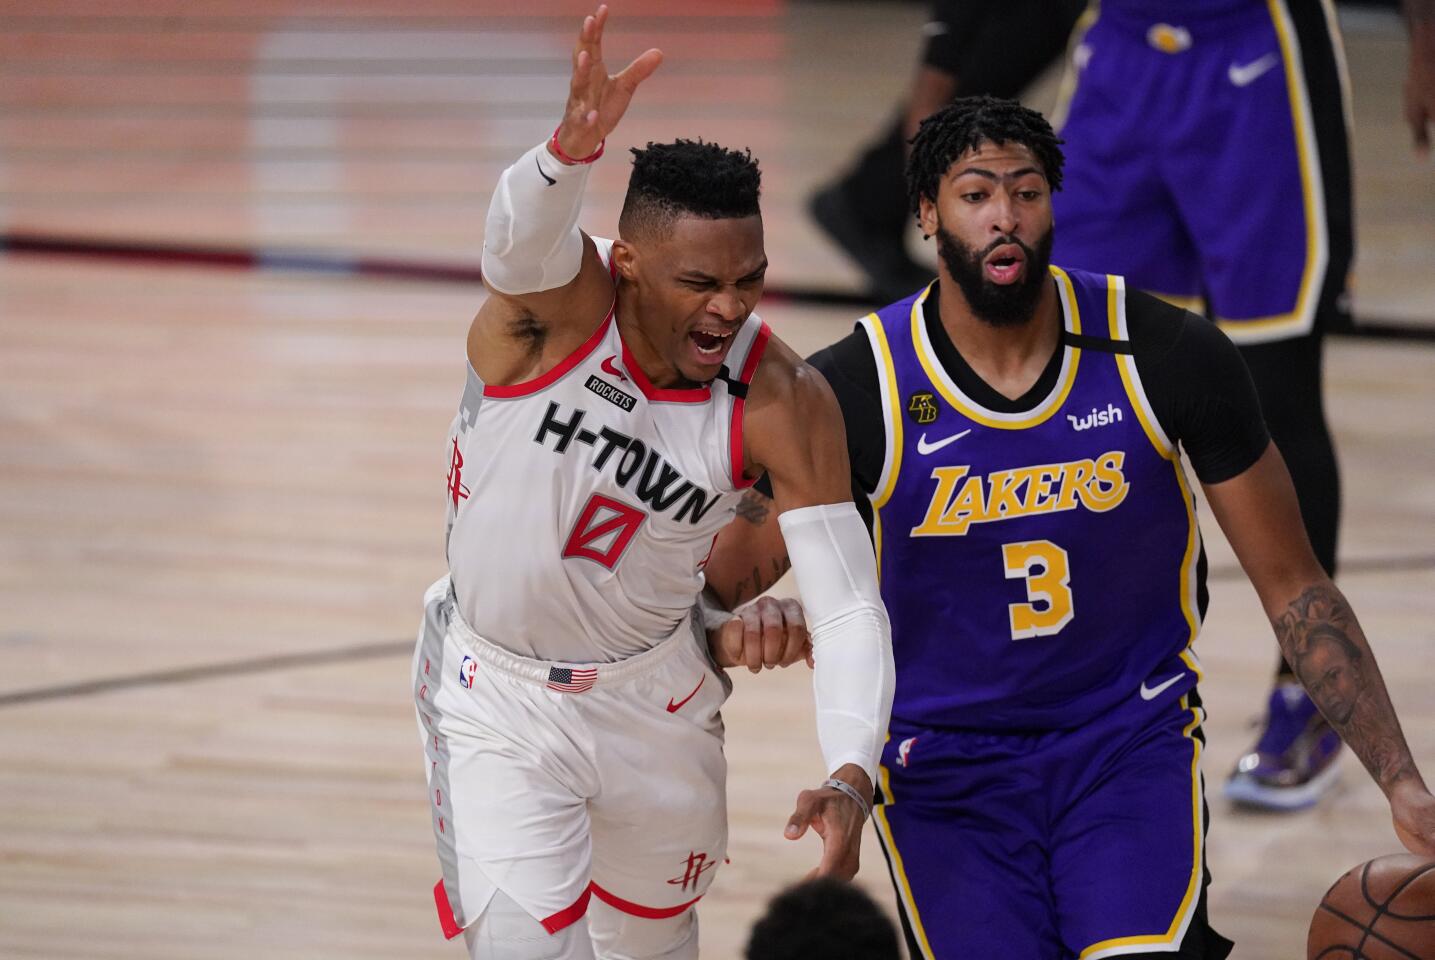 The Rockets' Russell Westbrook, left, loses the ball while being defended by the Lakers' Anthony Davis on Friday.